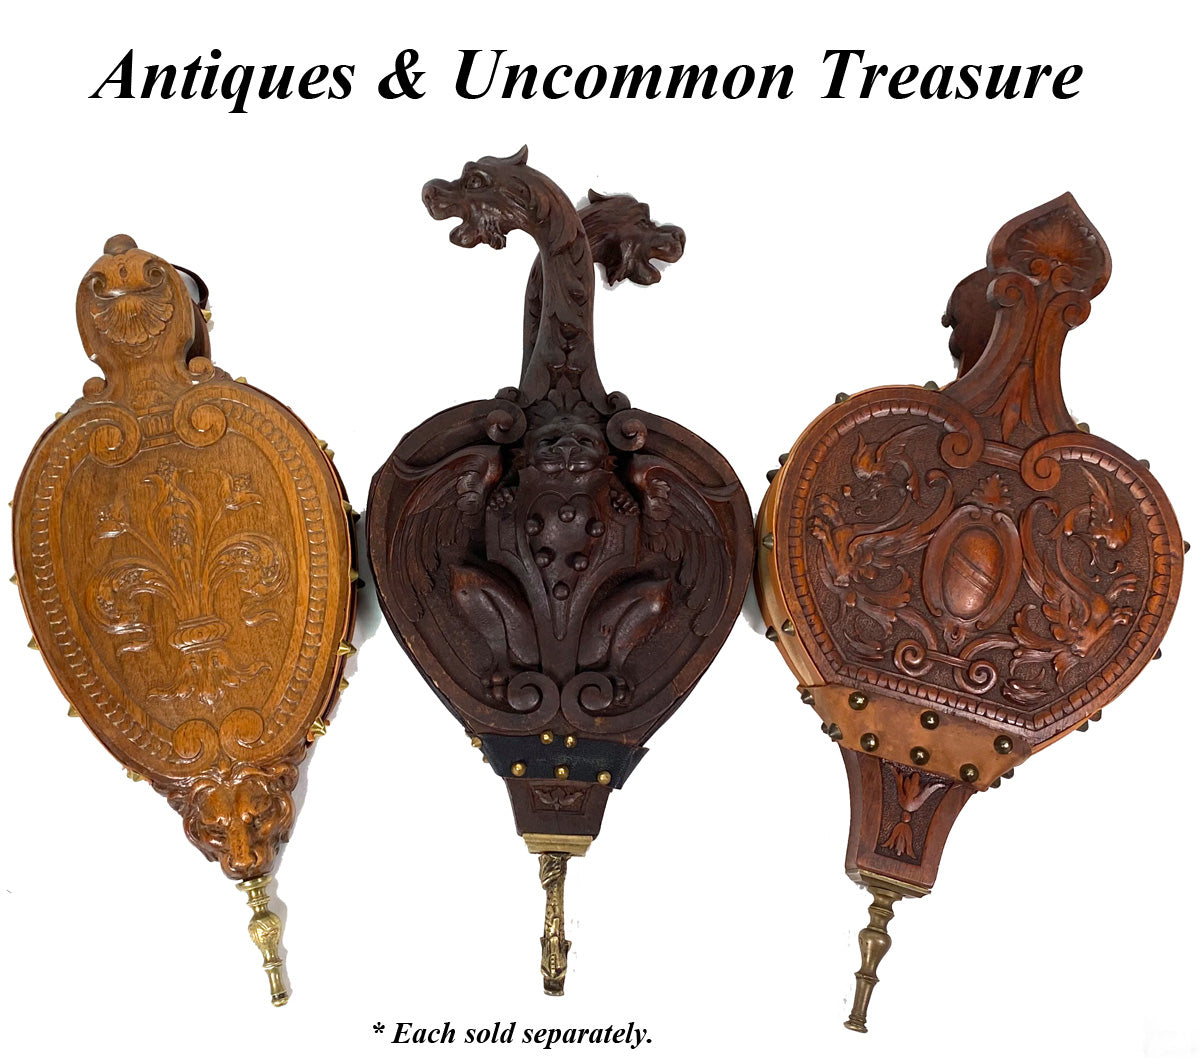 Rare Antique Victorian Era Carved 16.25" Fireplace Bellows, Highly Ornate with Winged Griffin Figures